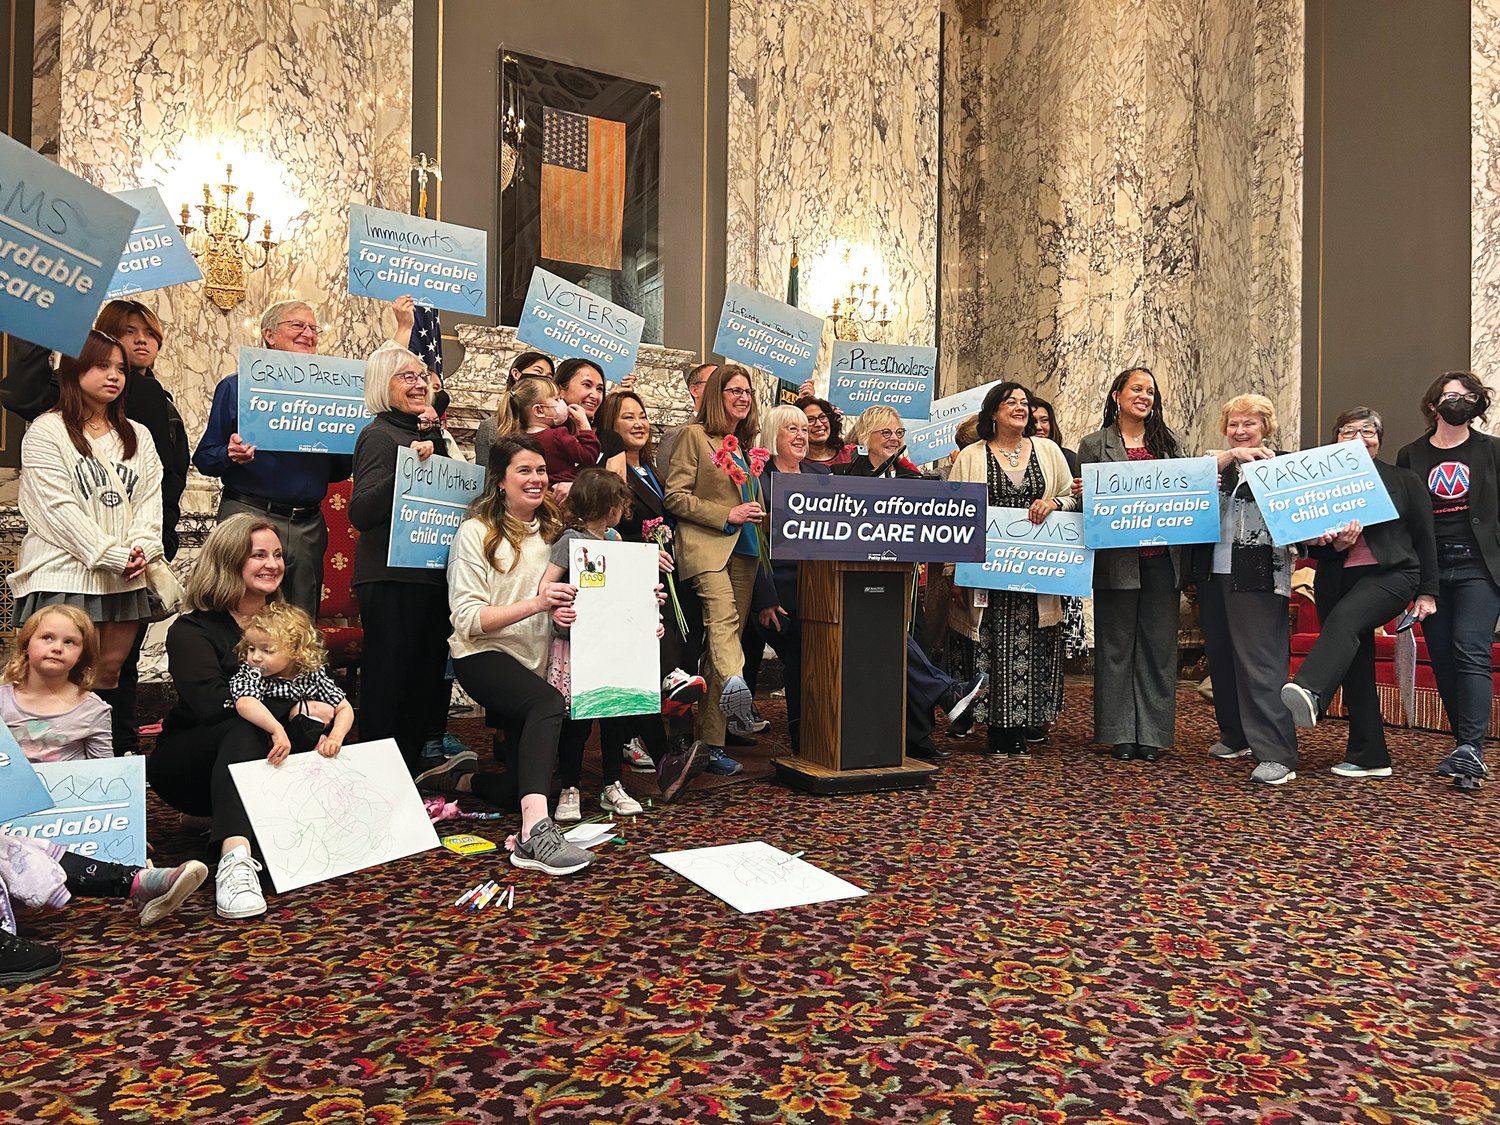 Sen. Patty Murray, D-Washington, joined with supporters in Olympia to celebrate the passage of a $1.85 billion increase in federal funding for the Child Care and Development Block Grant. The increase was part of a large appropriations bill adopted in December.